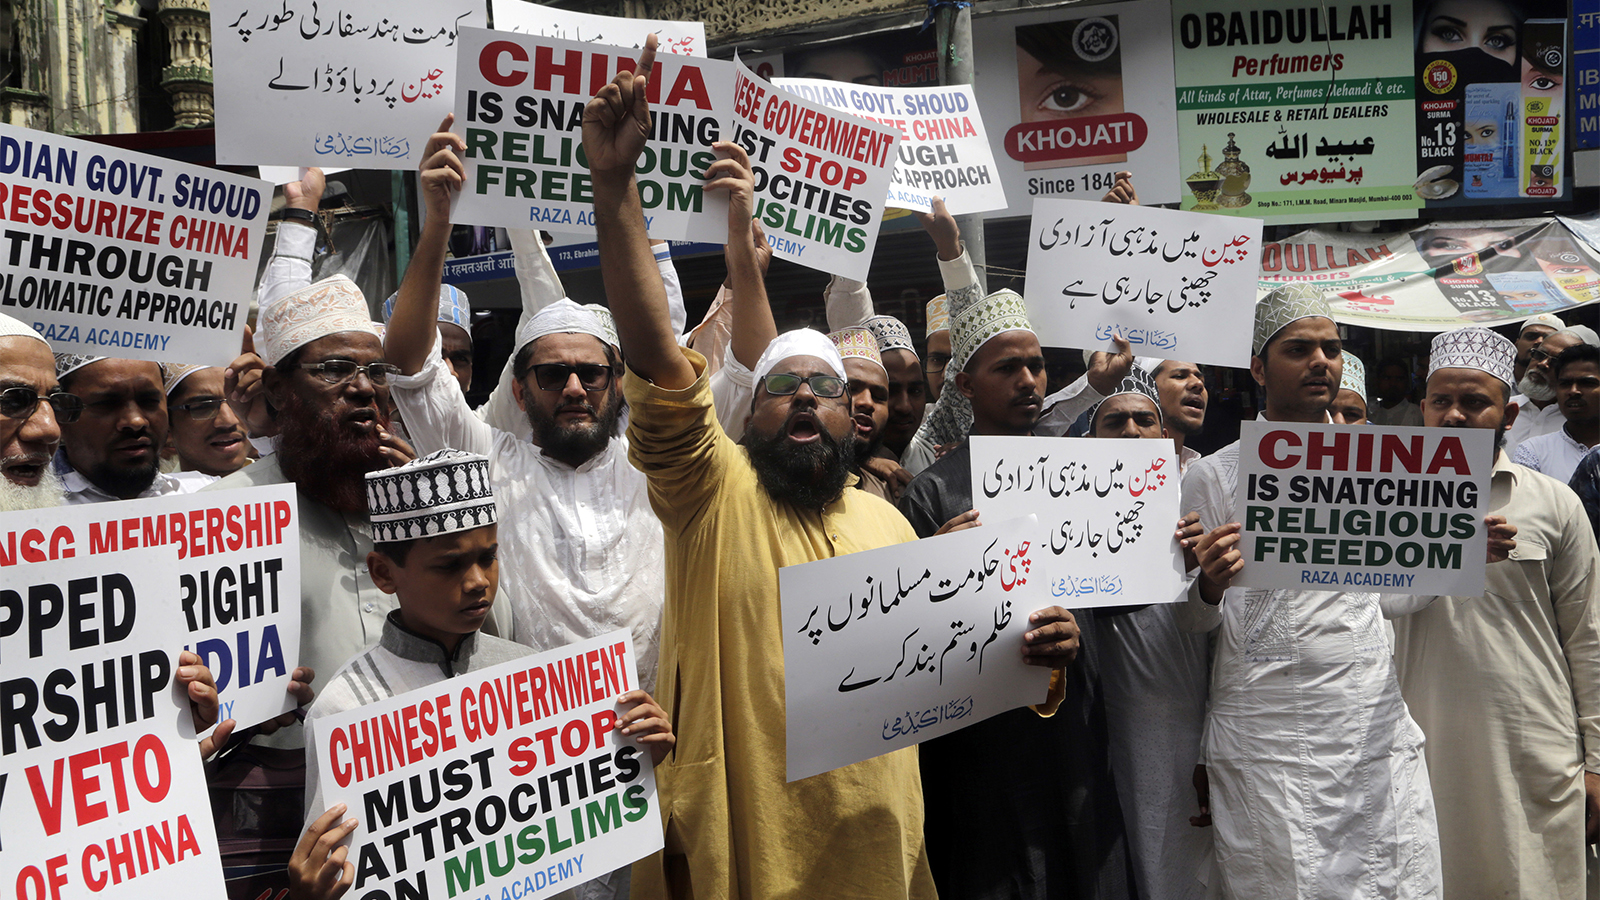 Indian Muslims shout slogans during a protest against the Chinese government, in Mumbai, India, on Sept. 14, 2018. Nearly 150 Indian Muslims held a street protest in Mumbai, demanding that China stop detaining thousands of members of the minority Uighur Muslim ethnic group in detention and political indoctrination centers in the Xinjiang region. (AP Photo/Rajanish Kakade)